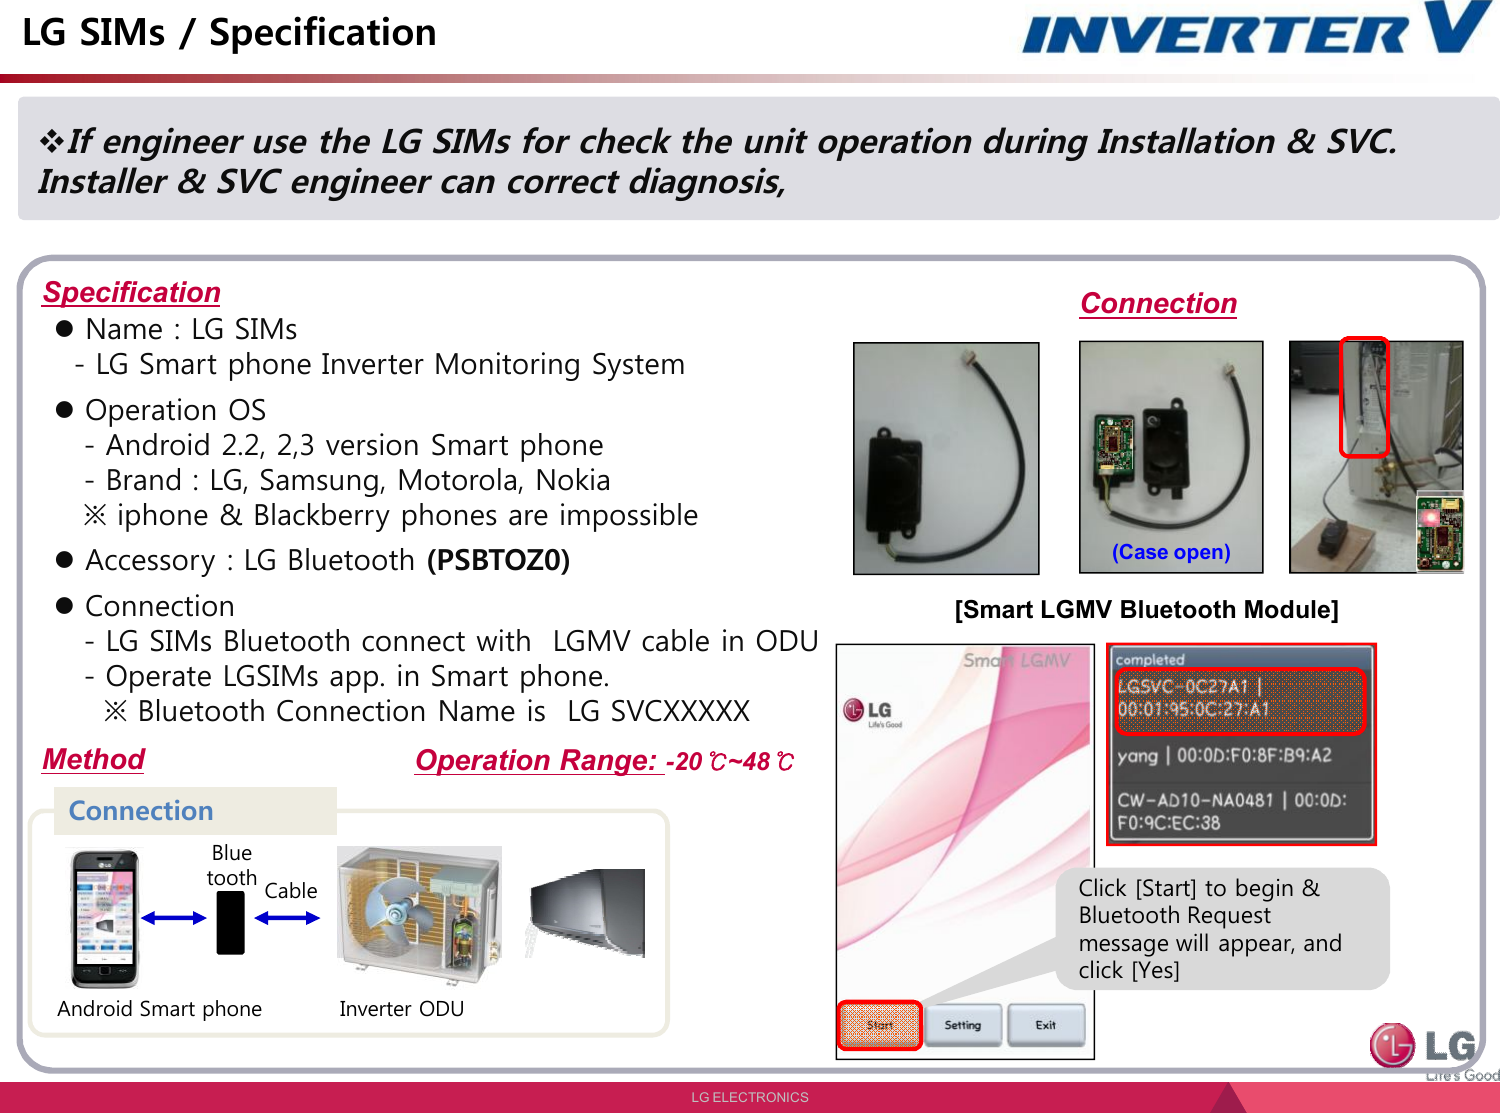 LG ELECTRONICSIf engineer use the LG SIMs for check the unit operation during Installation &amp; SVC. Installer &amp; SVC engineer can correct diagnosis, LG SIMs / Specification SpecificationMethodName : LG SIMs - LG Smart phone Inverter Monitoring SystemOperation OS- Android 2.2, 2,3 version Smart phone- Brand : LG, Samsung, Motorola, Nokia※ iphone &amp; Blackberry phones are impossibleAccessory : LG Bluetooth (PSBTOZ0)Connection- LG SIMs Bluetooth connect with  LGMV cable in ODU- Operate LGSIMs app. in Smart phone.※ Bluetooth Connection Name is  LG SVCXXXXXAndroid Smart phoneConnectionCableBluetoothInverter ODUConnection[Smart LGMV Bluetooth Module](Case open)Click [Start] to begin &amp;Bluetooth Request message will appear, and click [Yes]Operation Range: -20℃~48℃